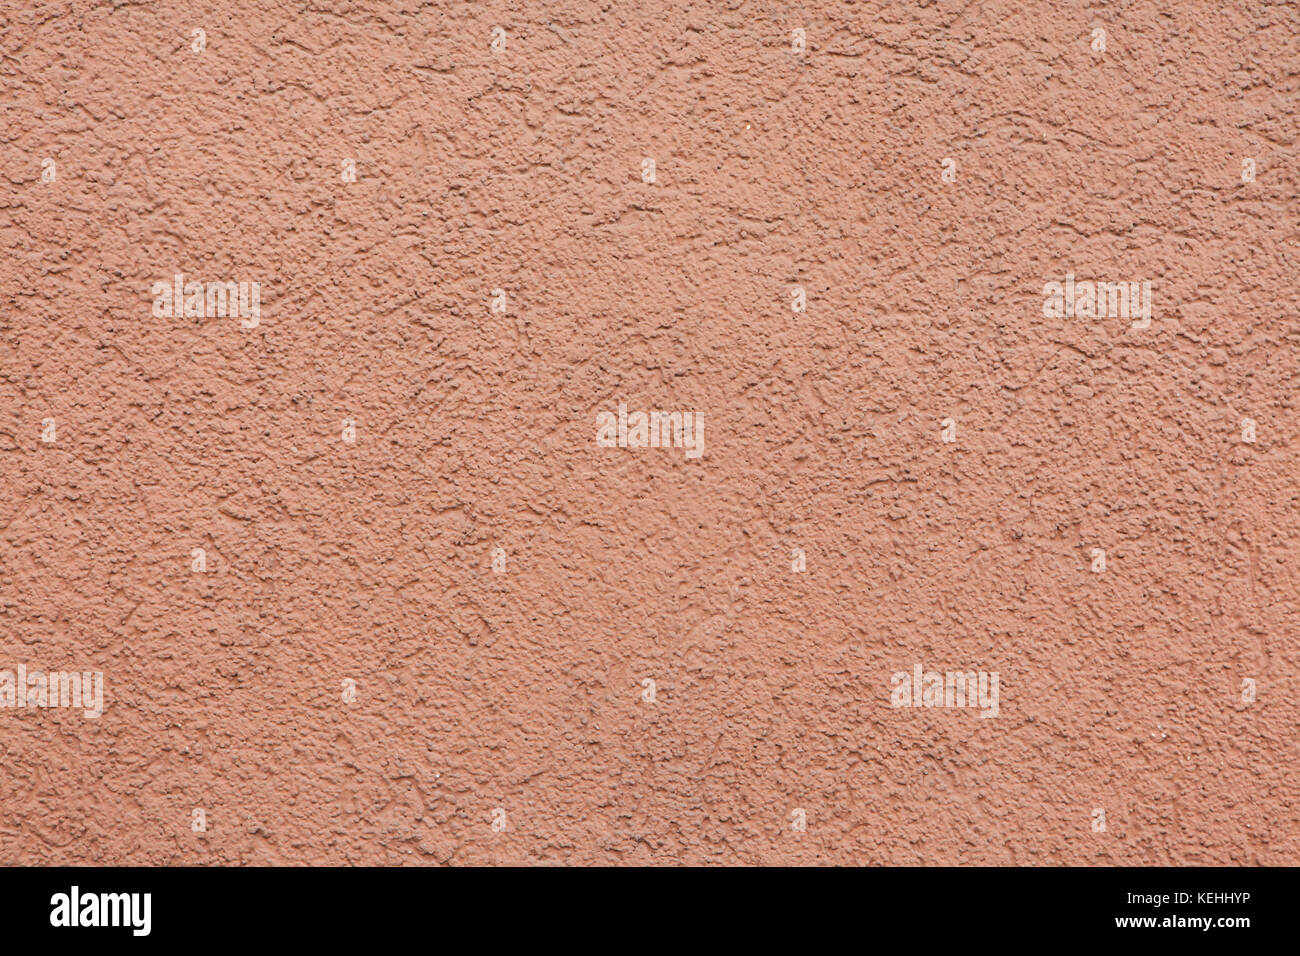 Pink painted stucco wall. Background texture. Stock Photo